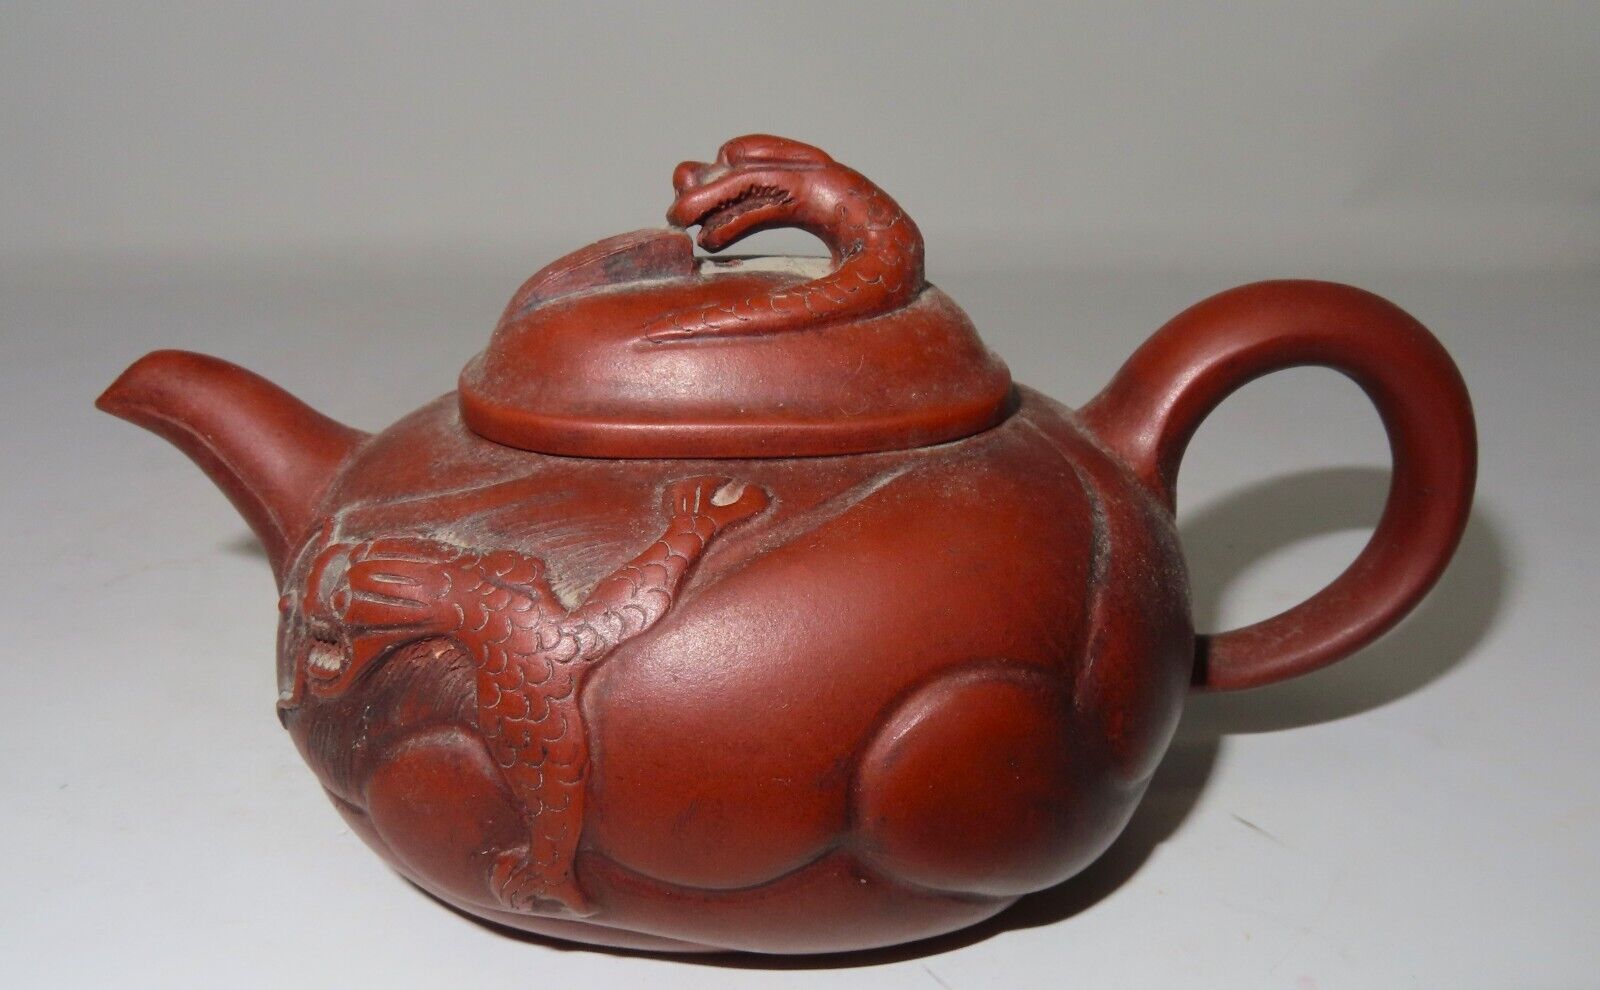 Outstanding Antique Chinese Red Clay Teapot with a Dragon Design